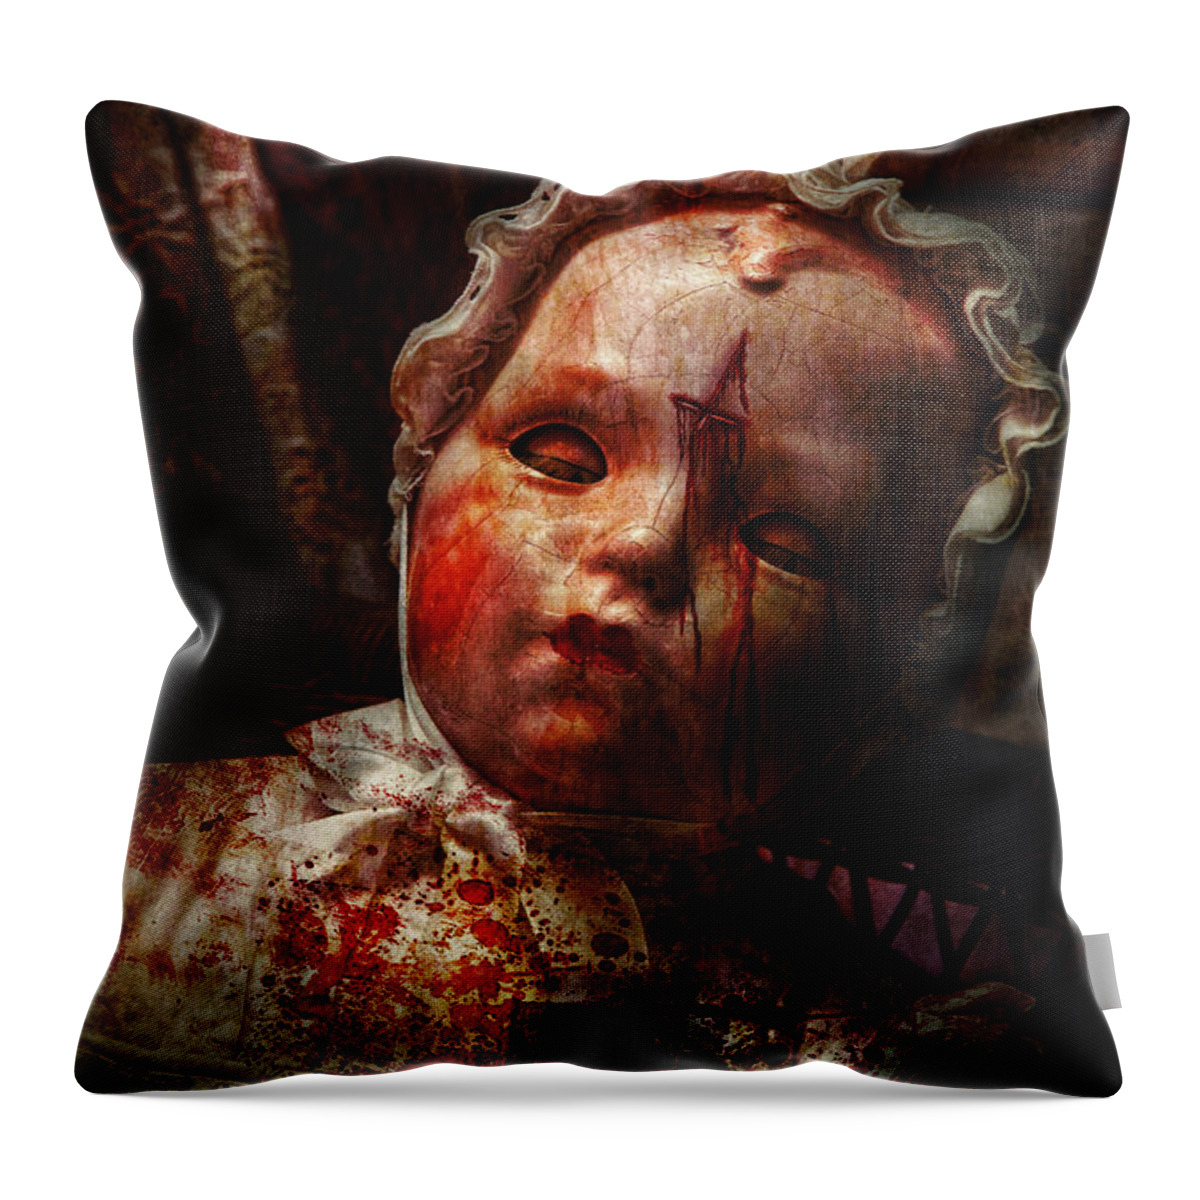 Haunted Town Throw Pillow featuring the digital art Creepy - Doll - It's best to let them sleep by Mike Savad